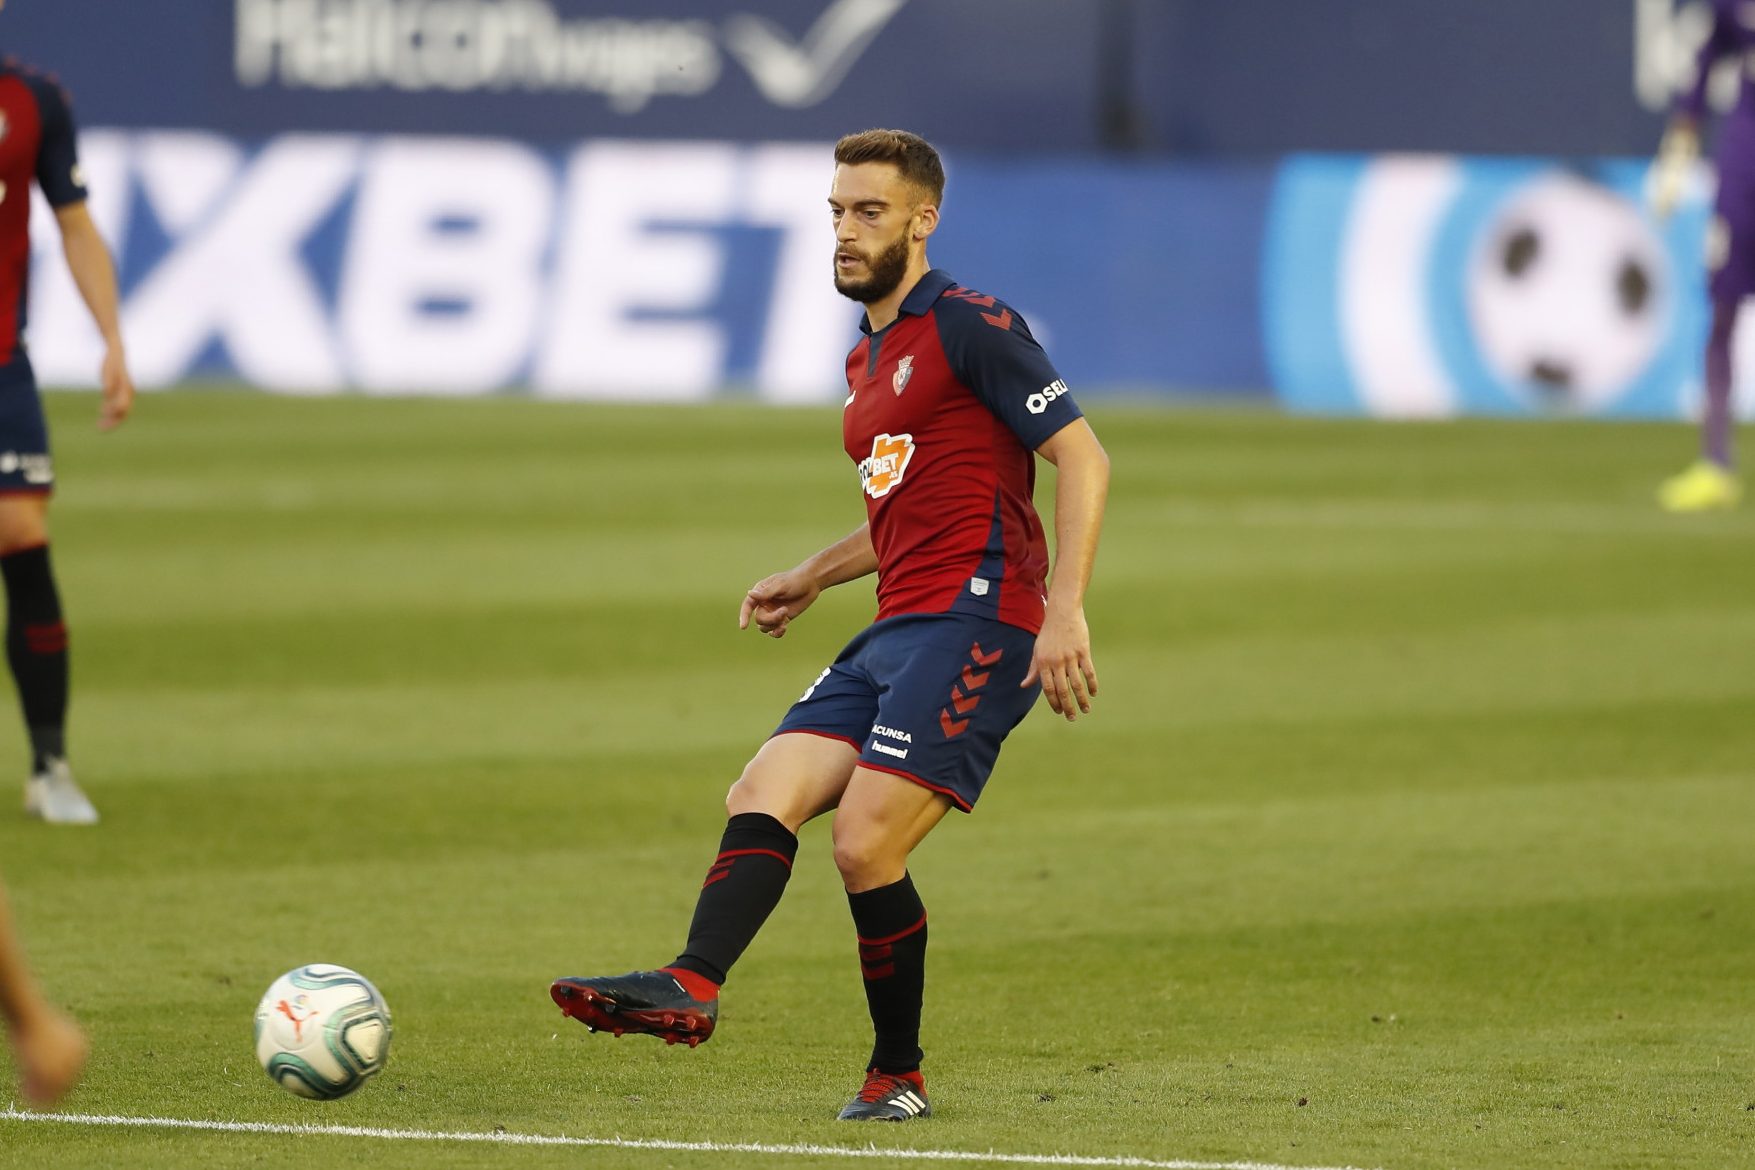 Osasuna replaces Hummel with Adidas as official kit supplier - Insider ...